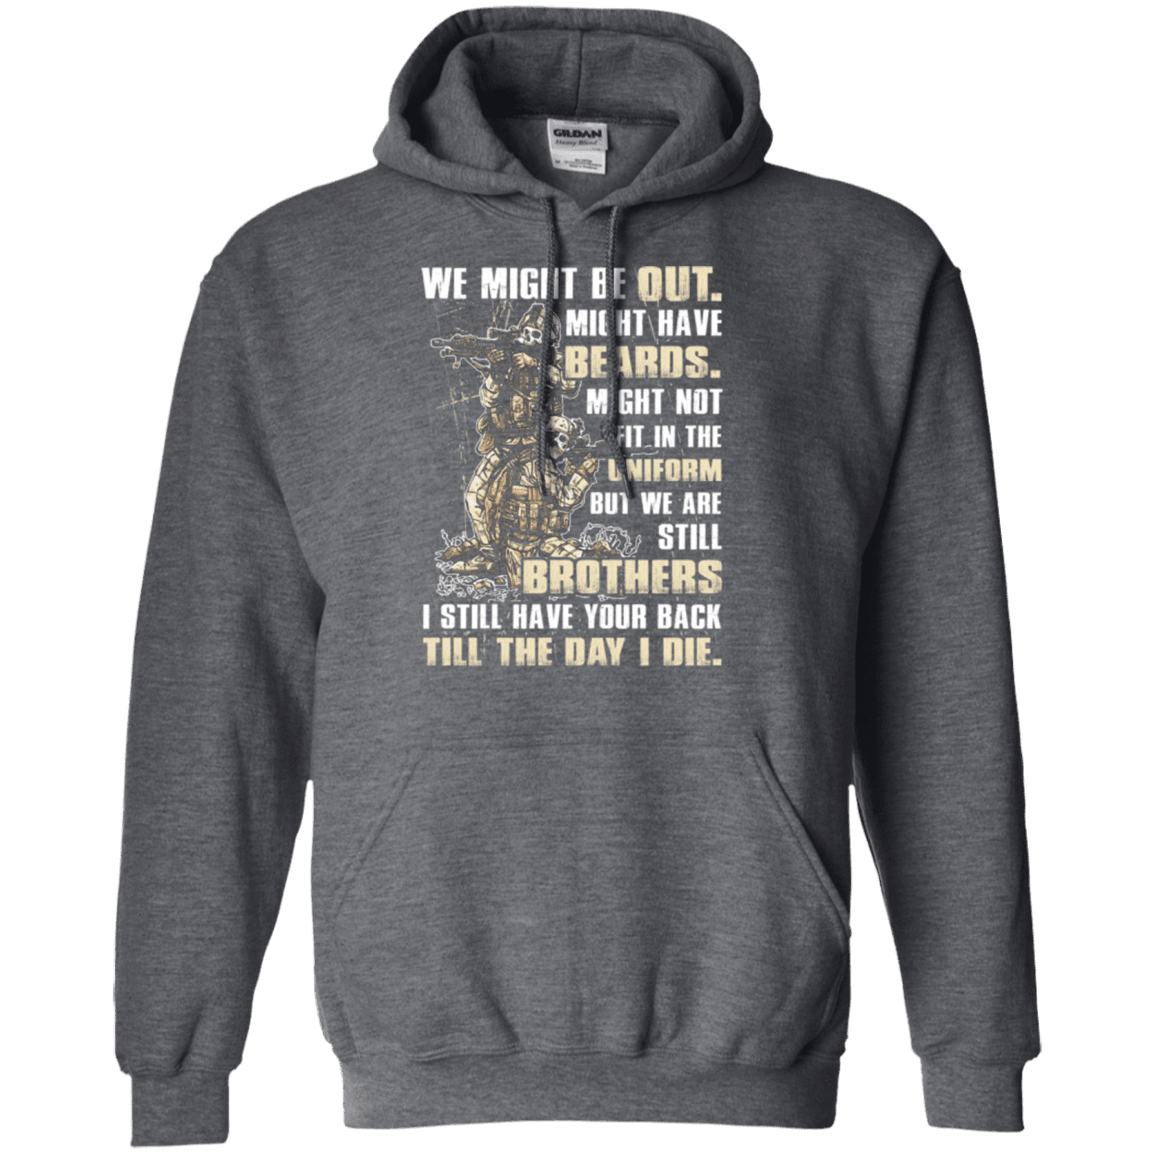 Military T-Shirt "Brothers Till The Day I Die Veteran" Front-TShirt-General-Veterans Nation